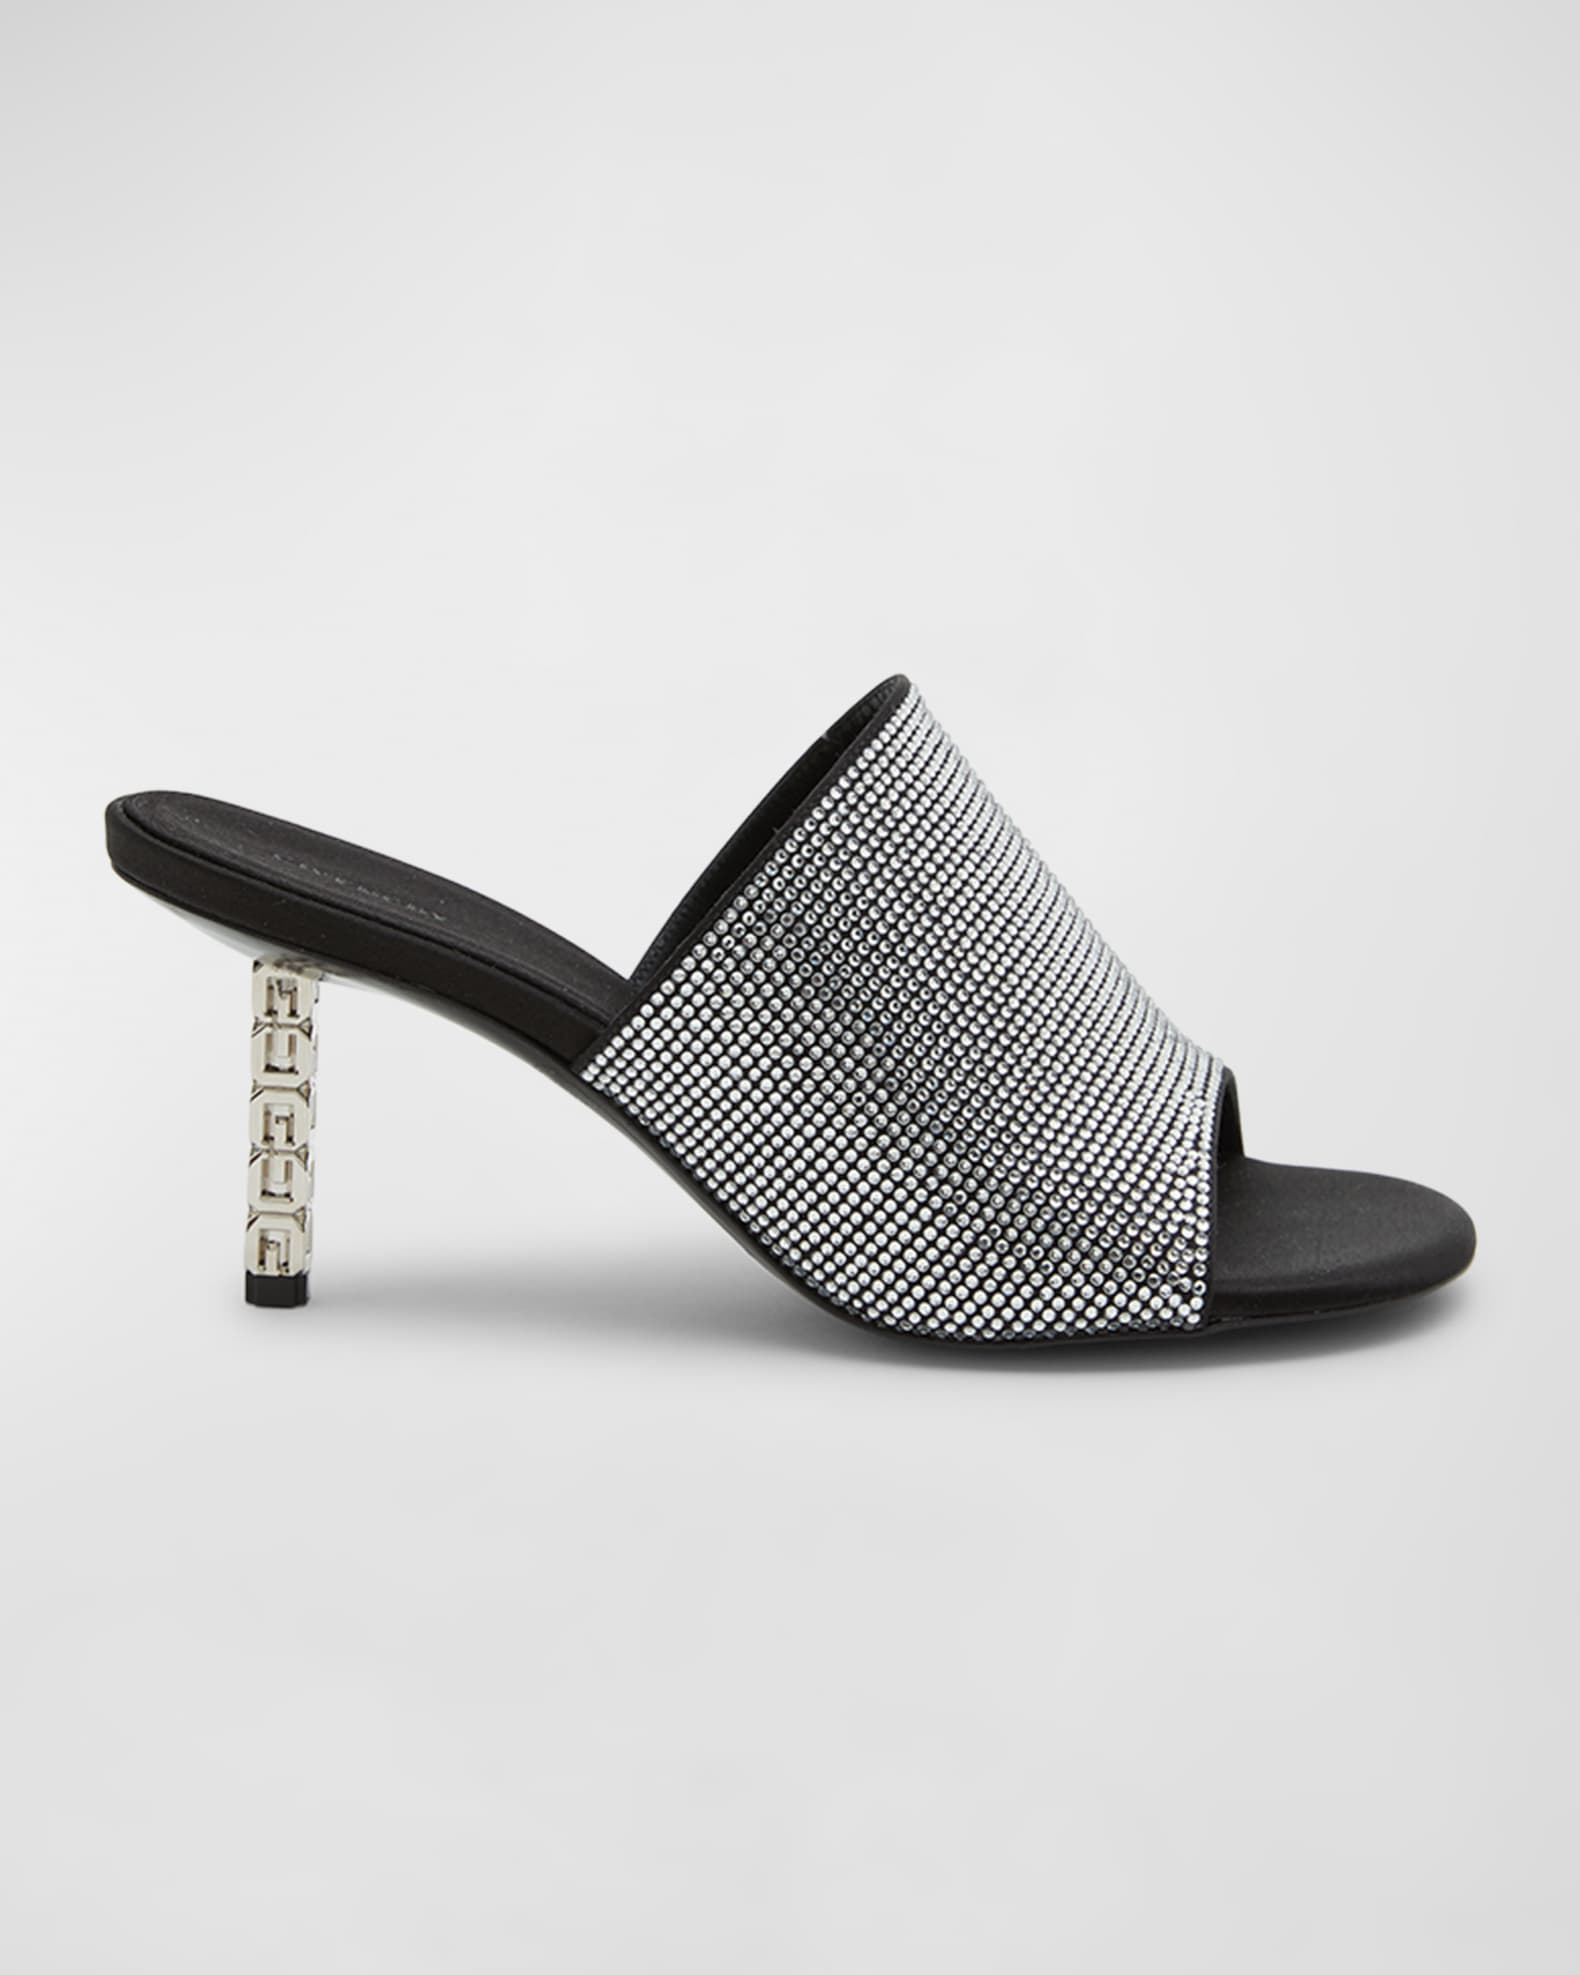 Givenchy Strass G Cube-Heel Slide Sandals | Neiman Marcus